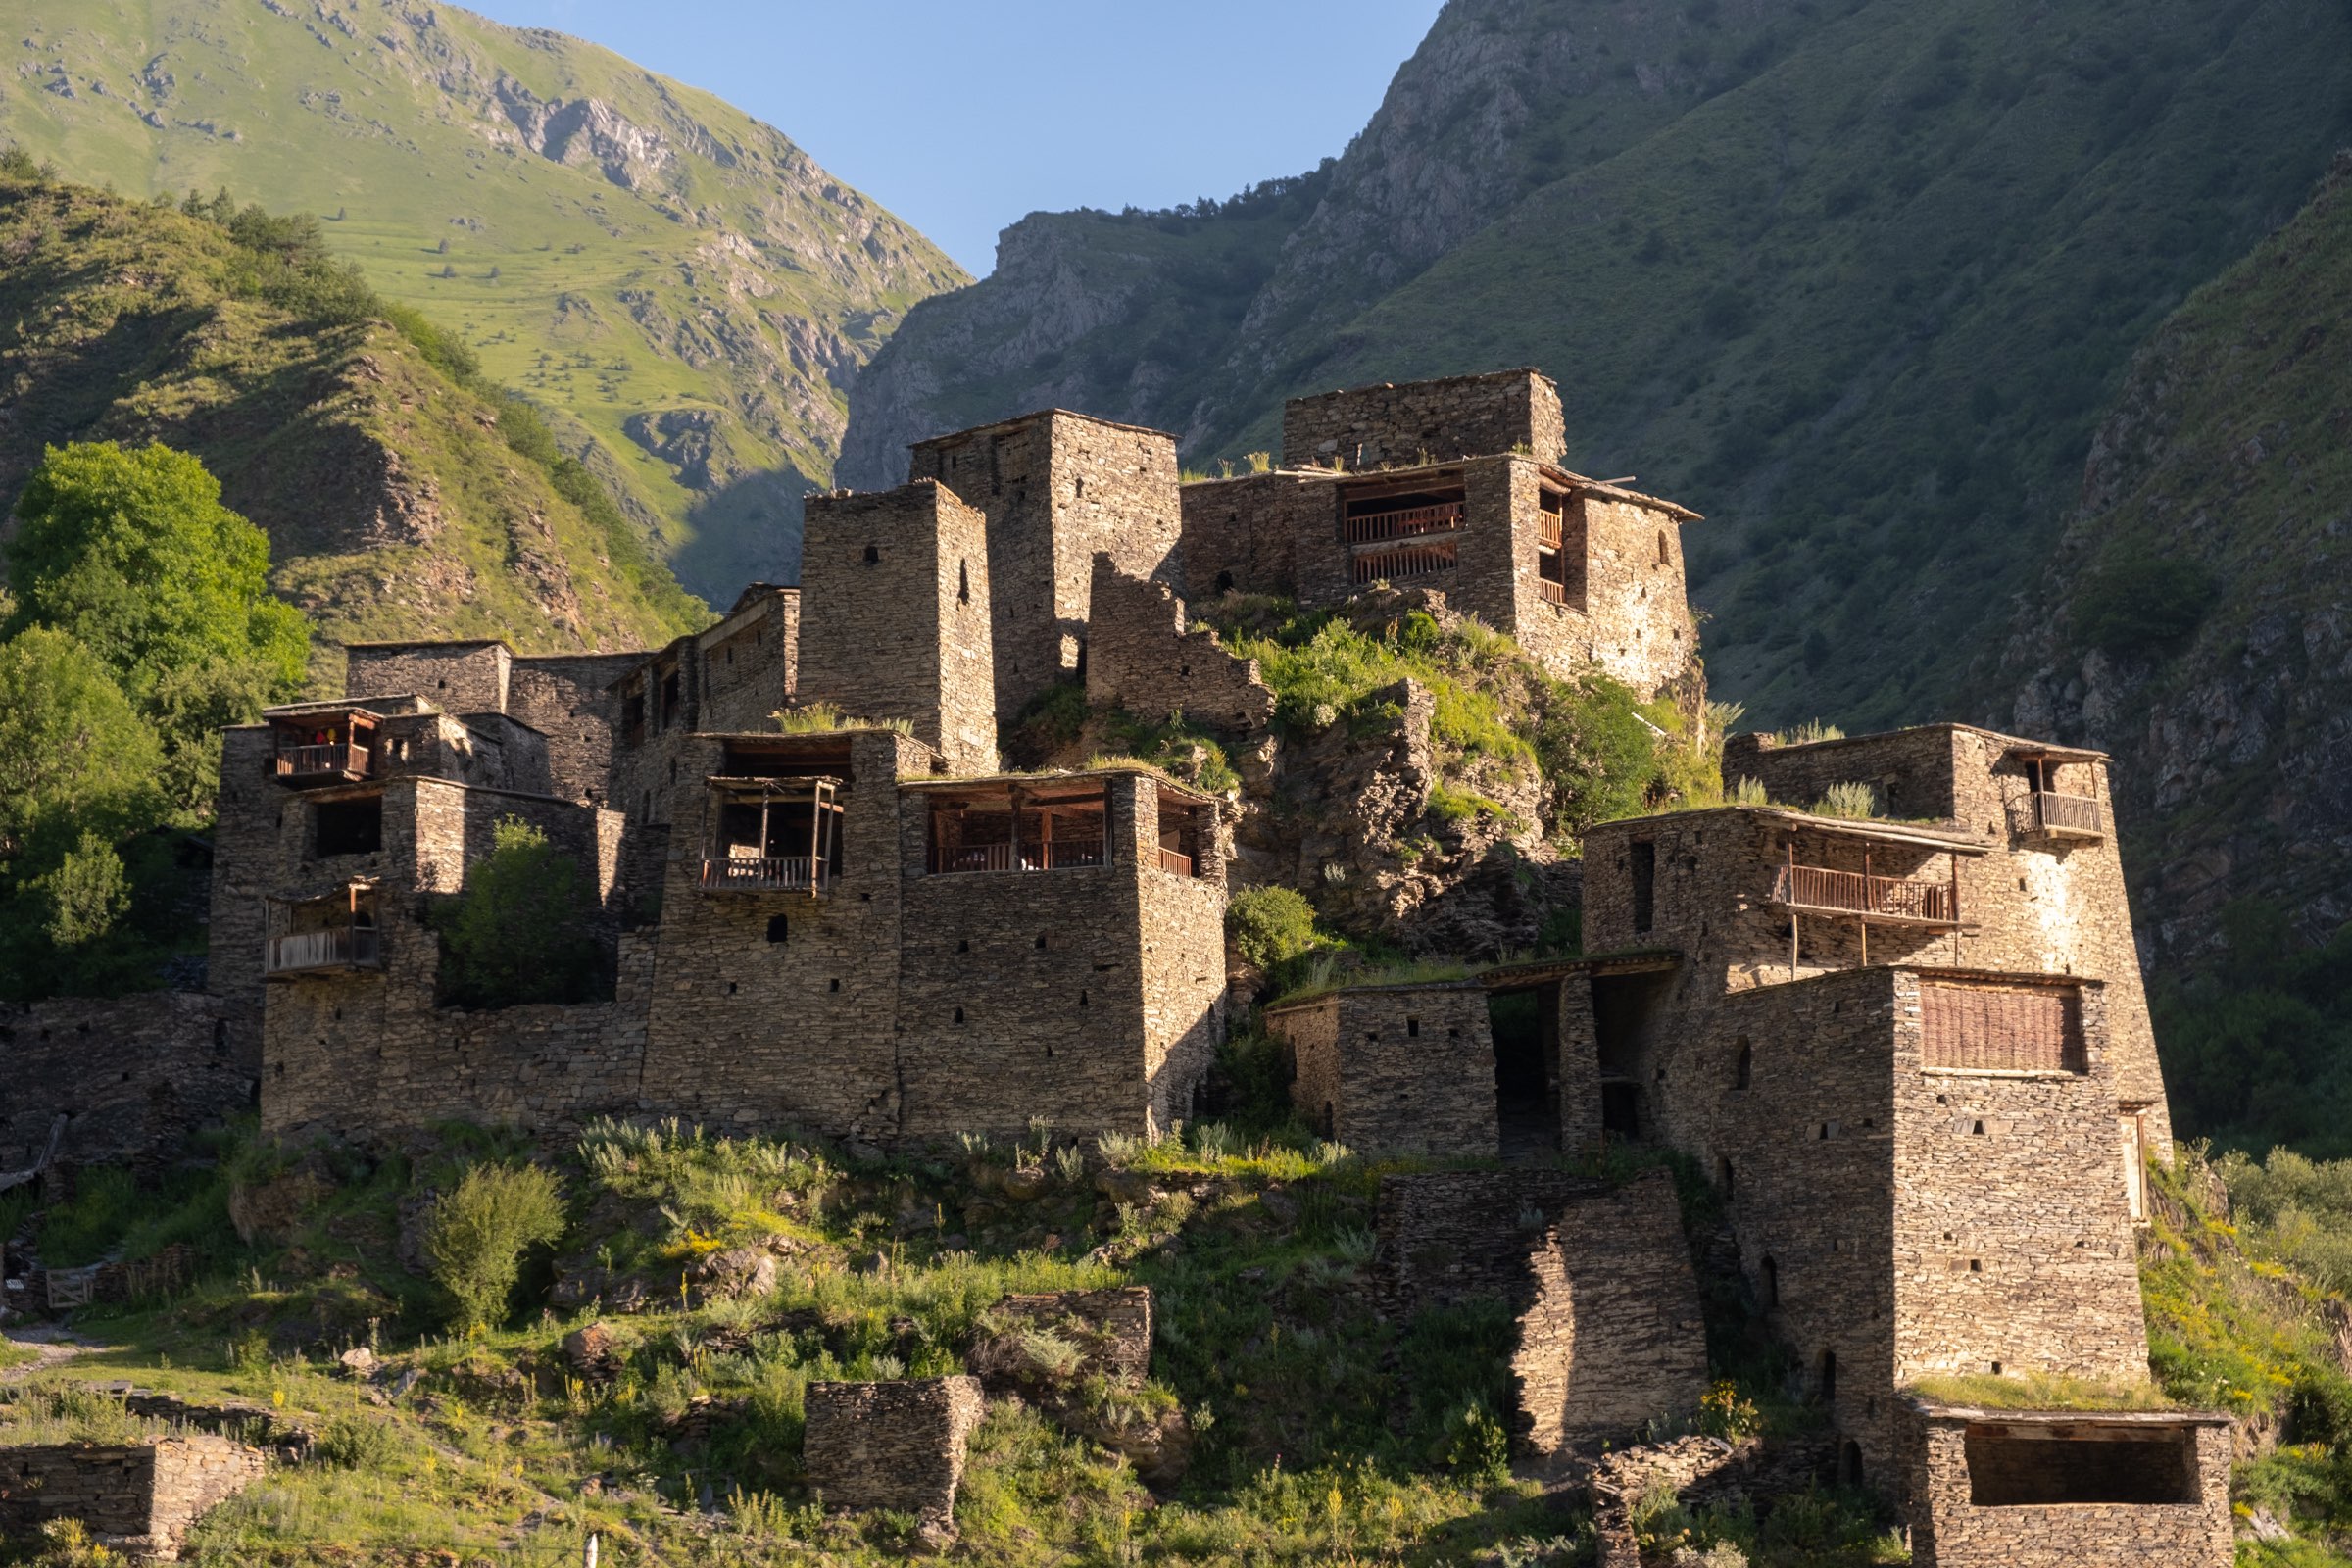 The ancient medieval village of Shatili, Khevsureti standing tall in the early morning light